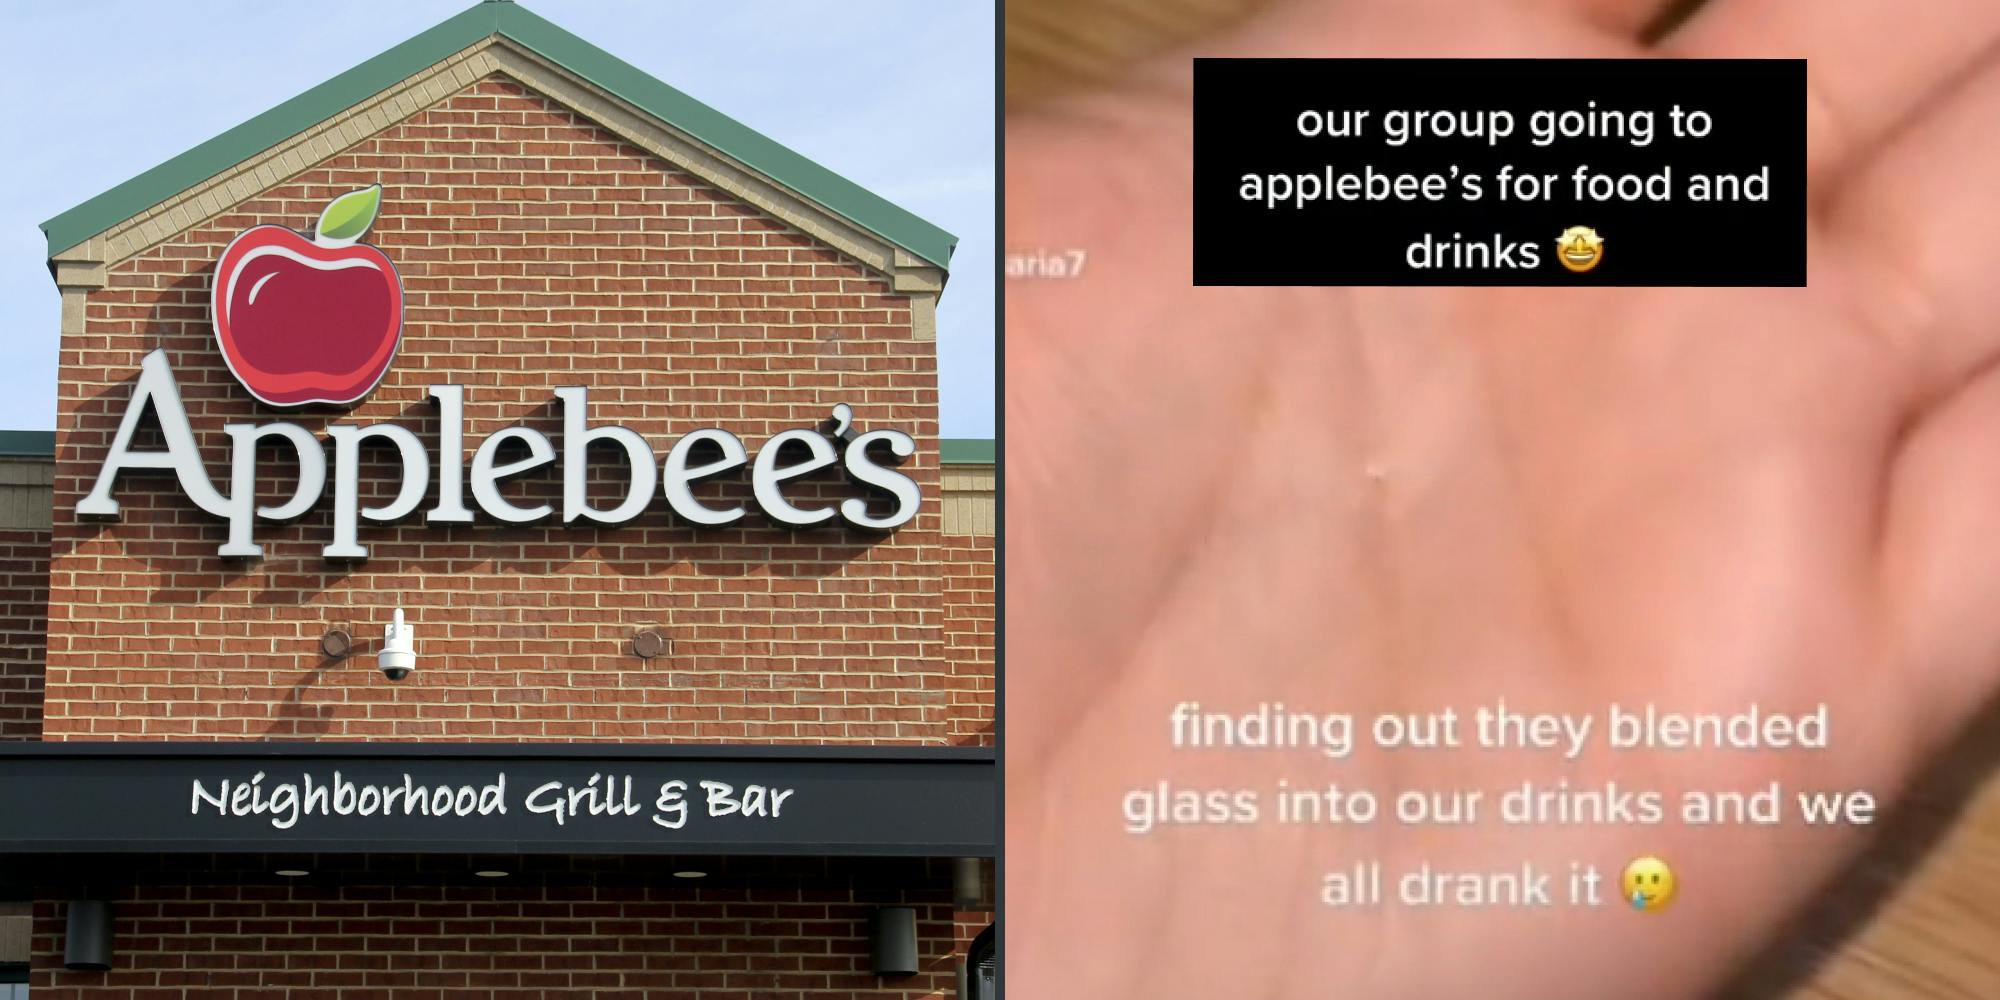 Applebee's neighborhood grill and bar restaurant (l) Hand with small pebble of glass caption " our group going to applebee's for food and drinks... finding out they blended glass into our drinks and we all drank it" (r)